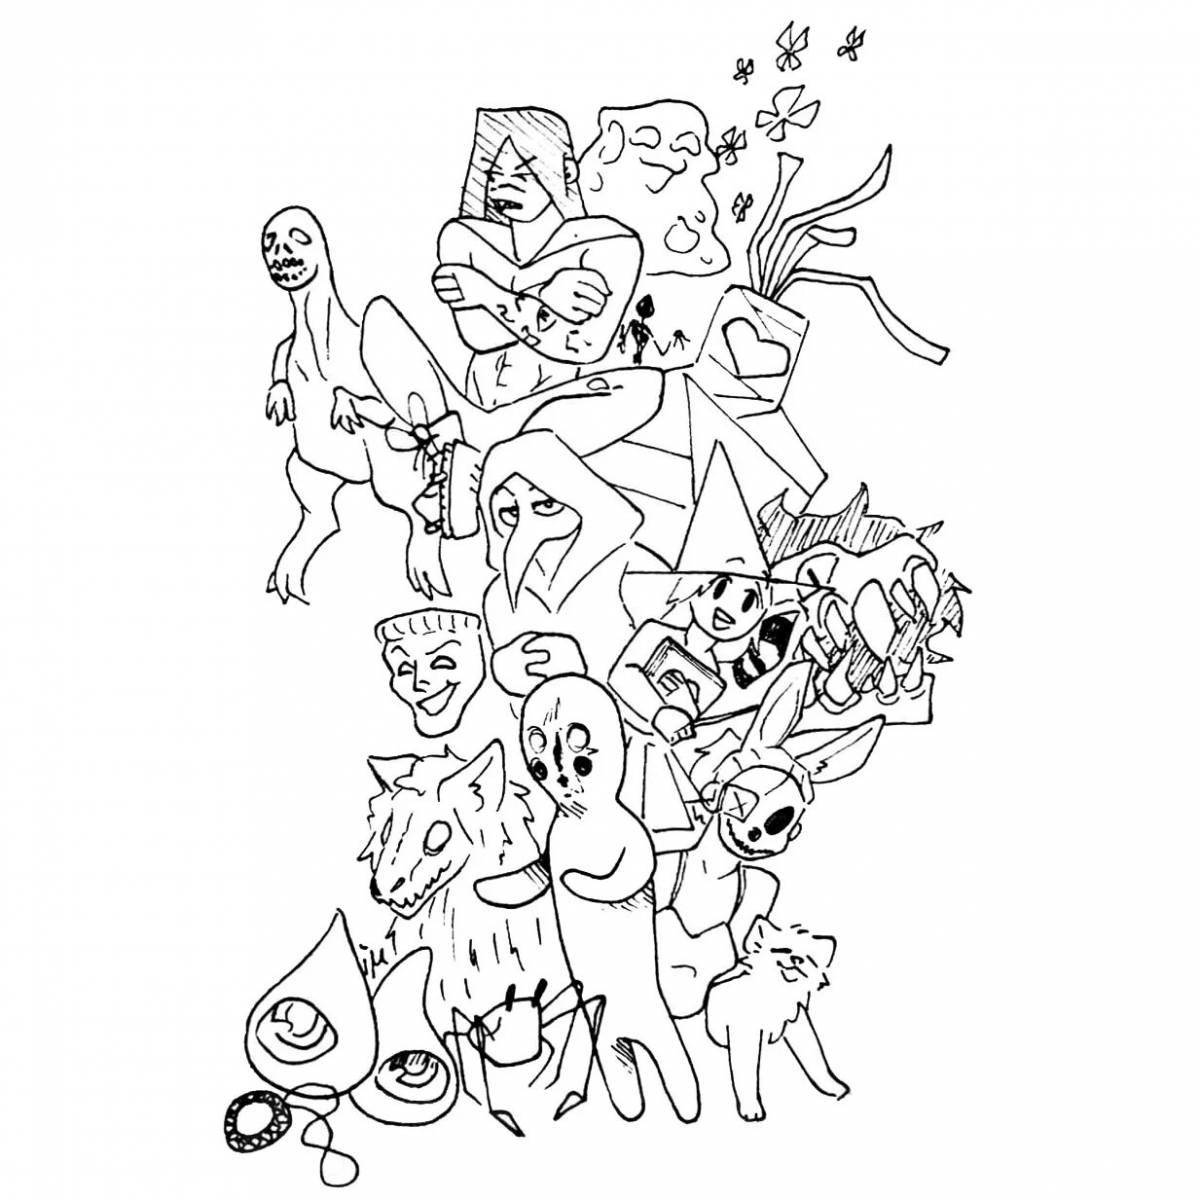 Sweet scp modest coloring page